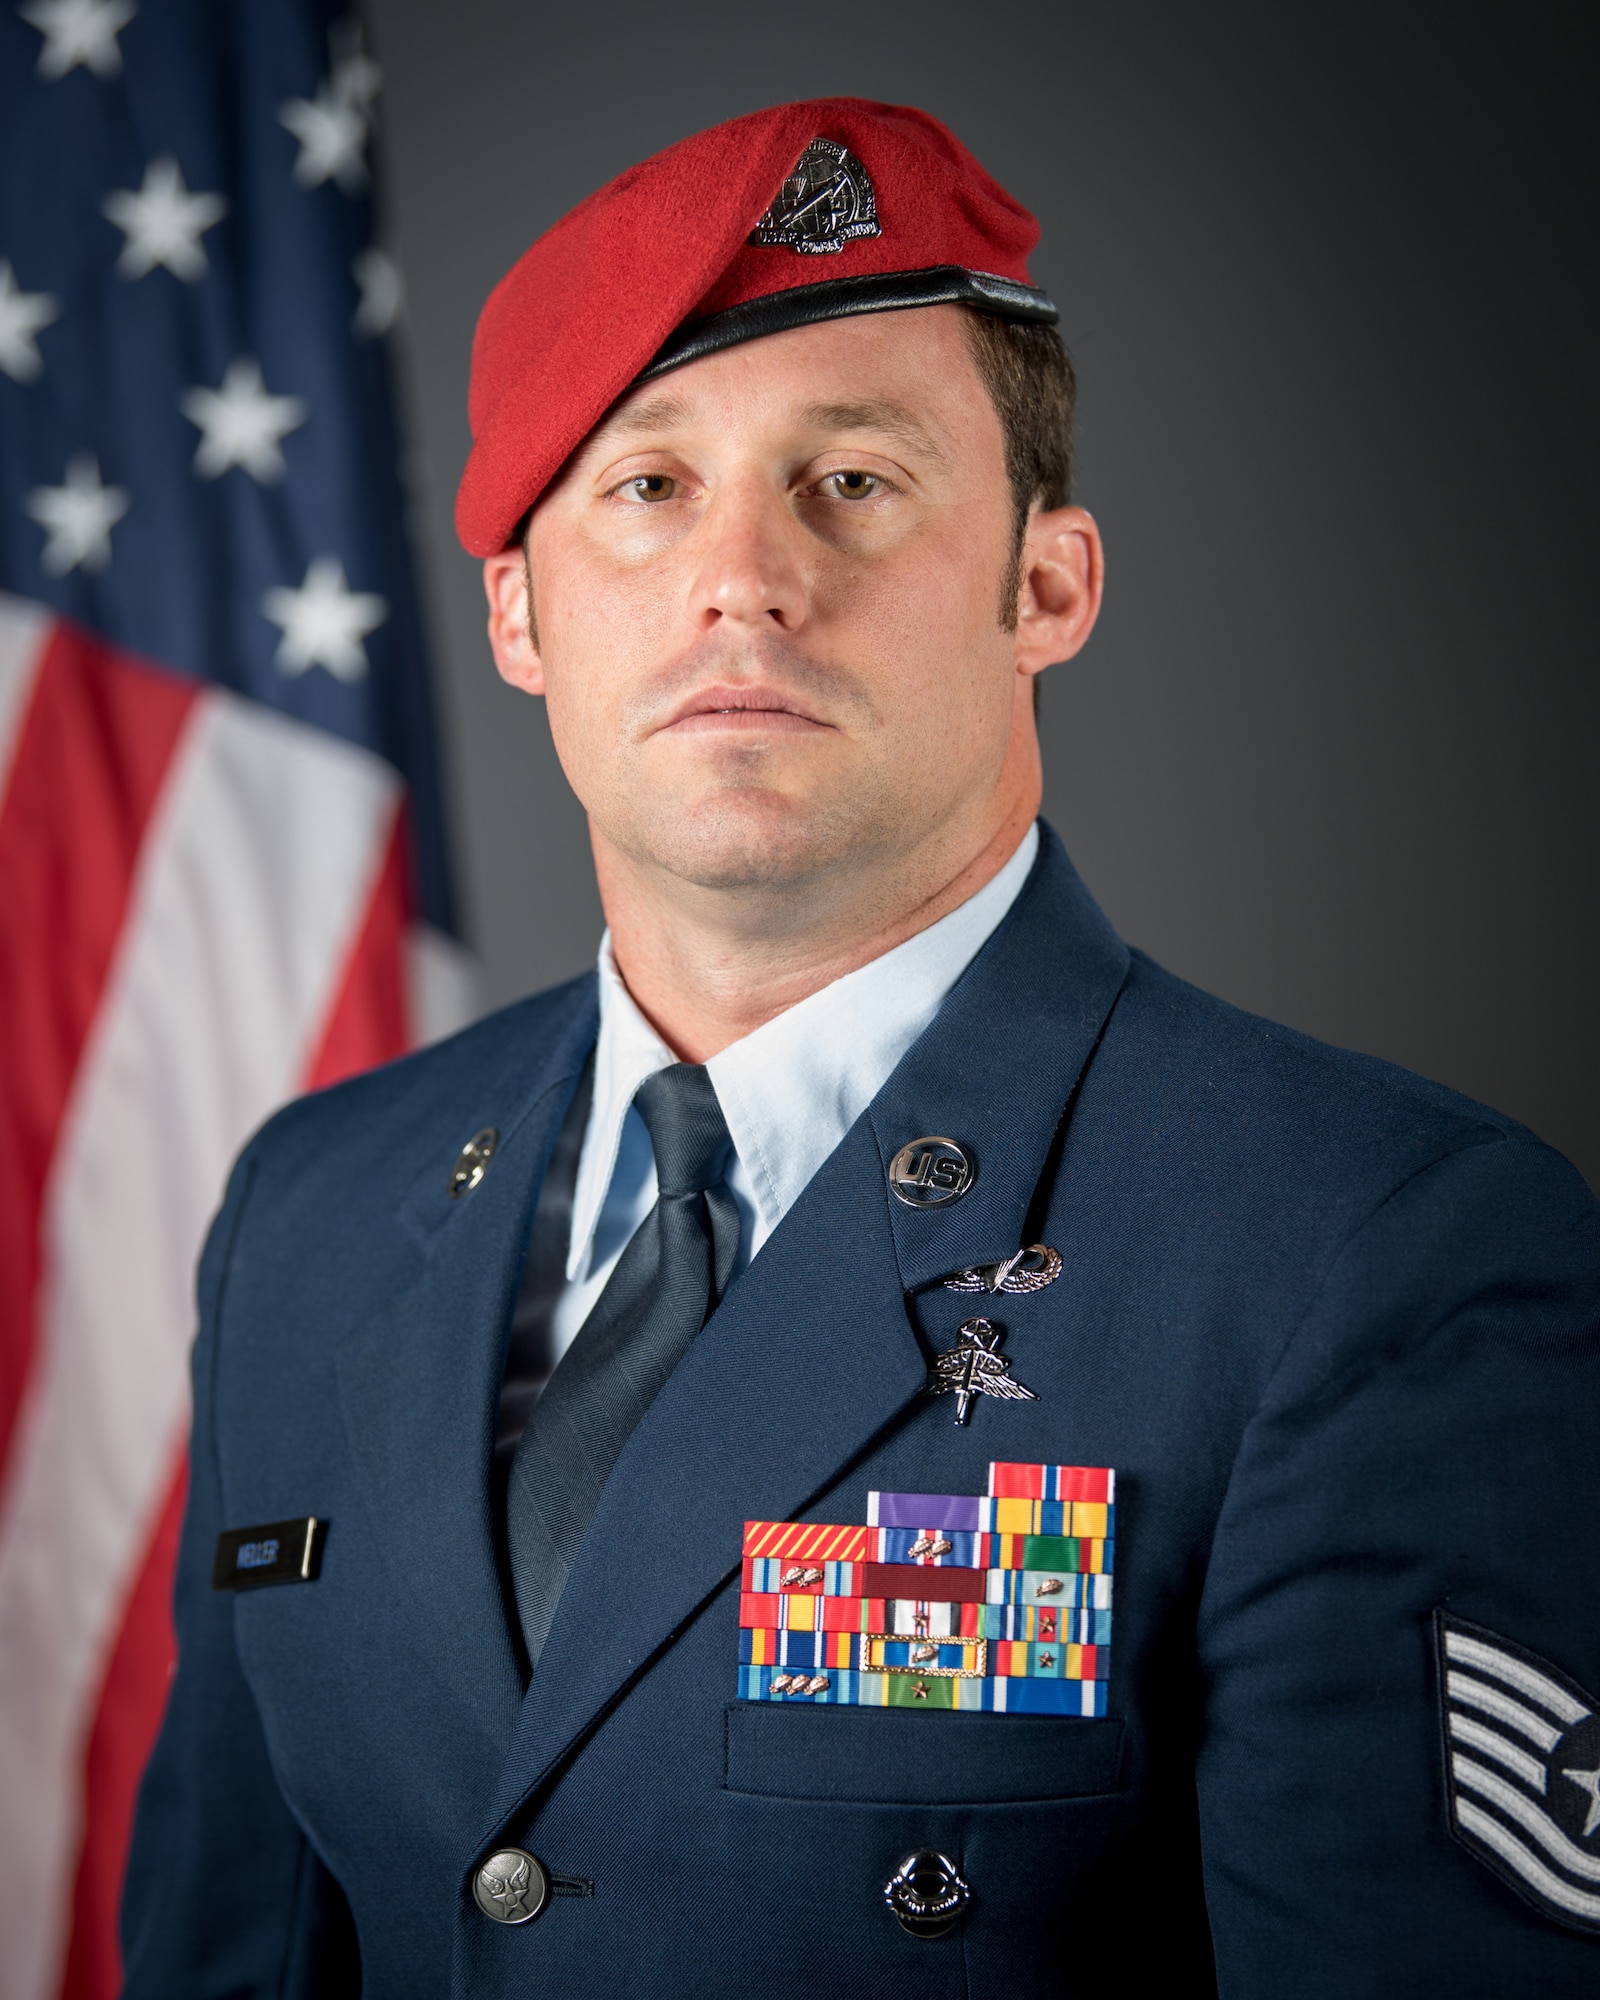 Tech. Sgt. Daniel Keller, a combat controller in the Kentucky Air National Guard’s 123rd Special Tactics Squadron, was presented with the Air Force Cross by Air Force Chief of Staff Gen. David L. Goldfein during a ceremony at the Kentucky Air National Guard Base in Louisville, Ky, Aug.13, 2019. Keller earned the medal for valor on the battlefield in Afghanistan. (U.S. Air National Guard photo by Staff Sgt. Joshua Horton)